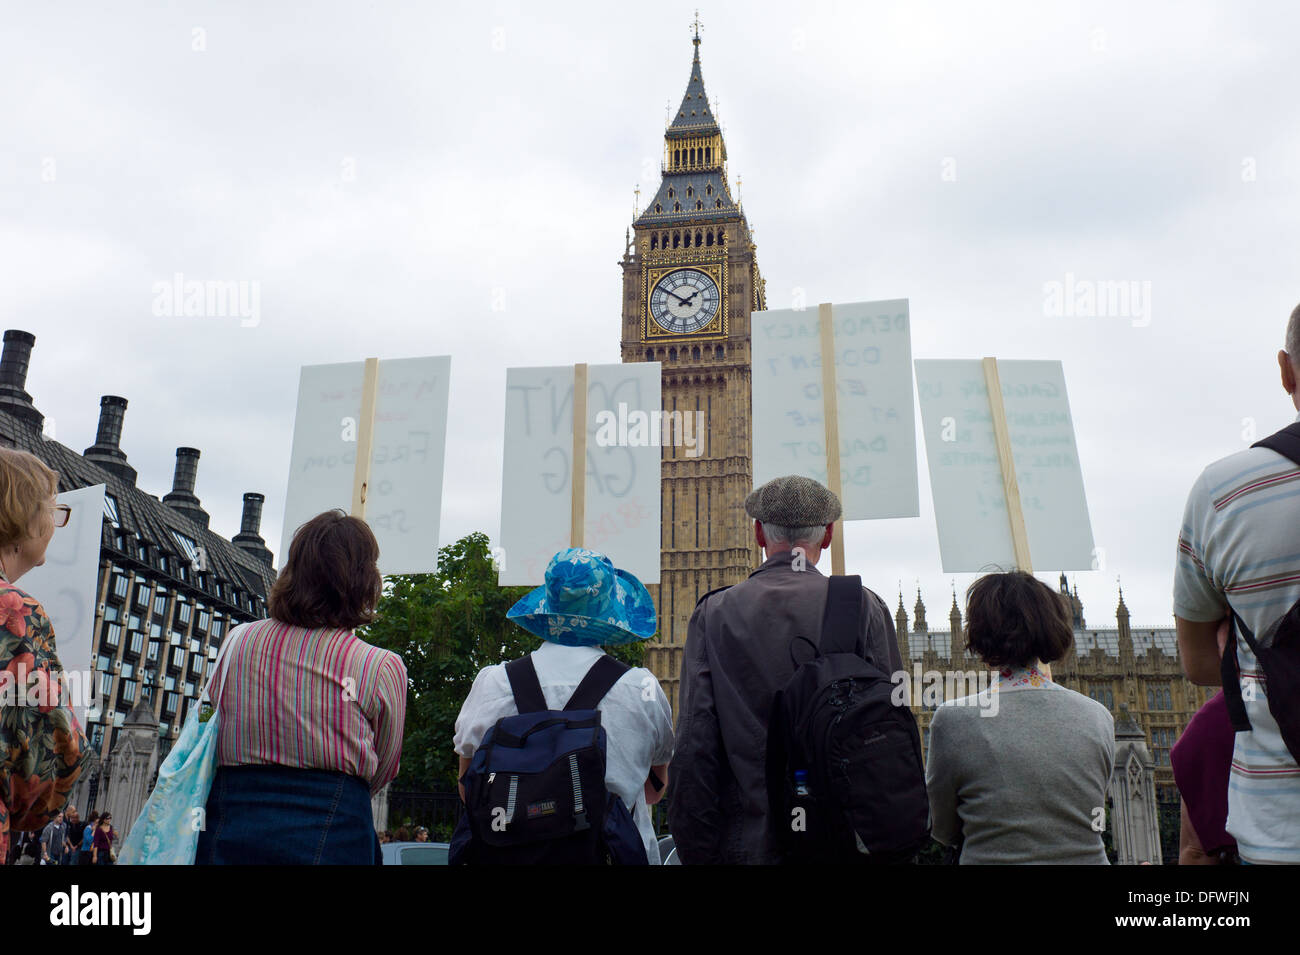 Protesters holding placards outside the Houses of Parliament in London UK Photo Credit: David Levenson / Alamy Stock Photo